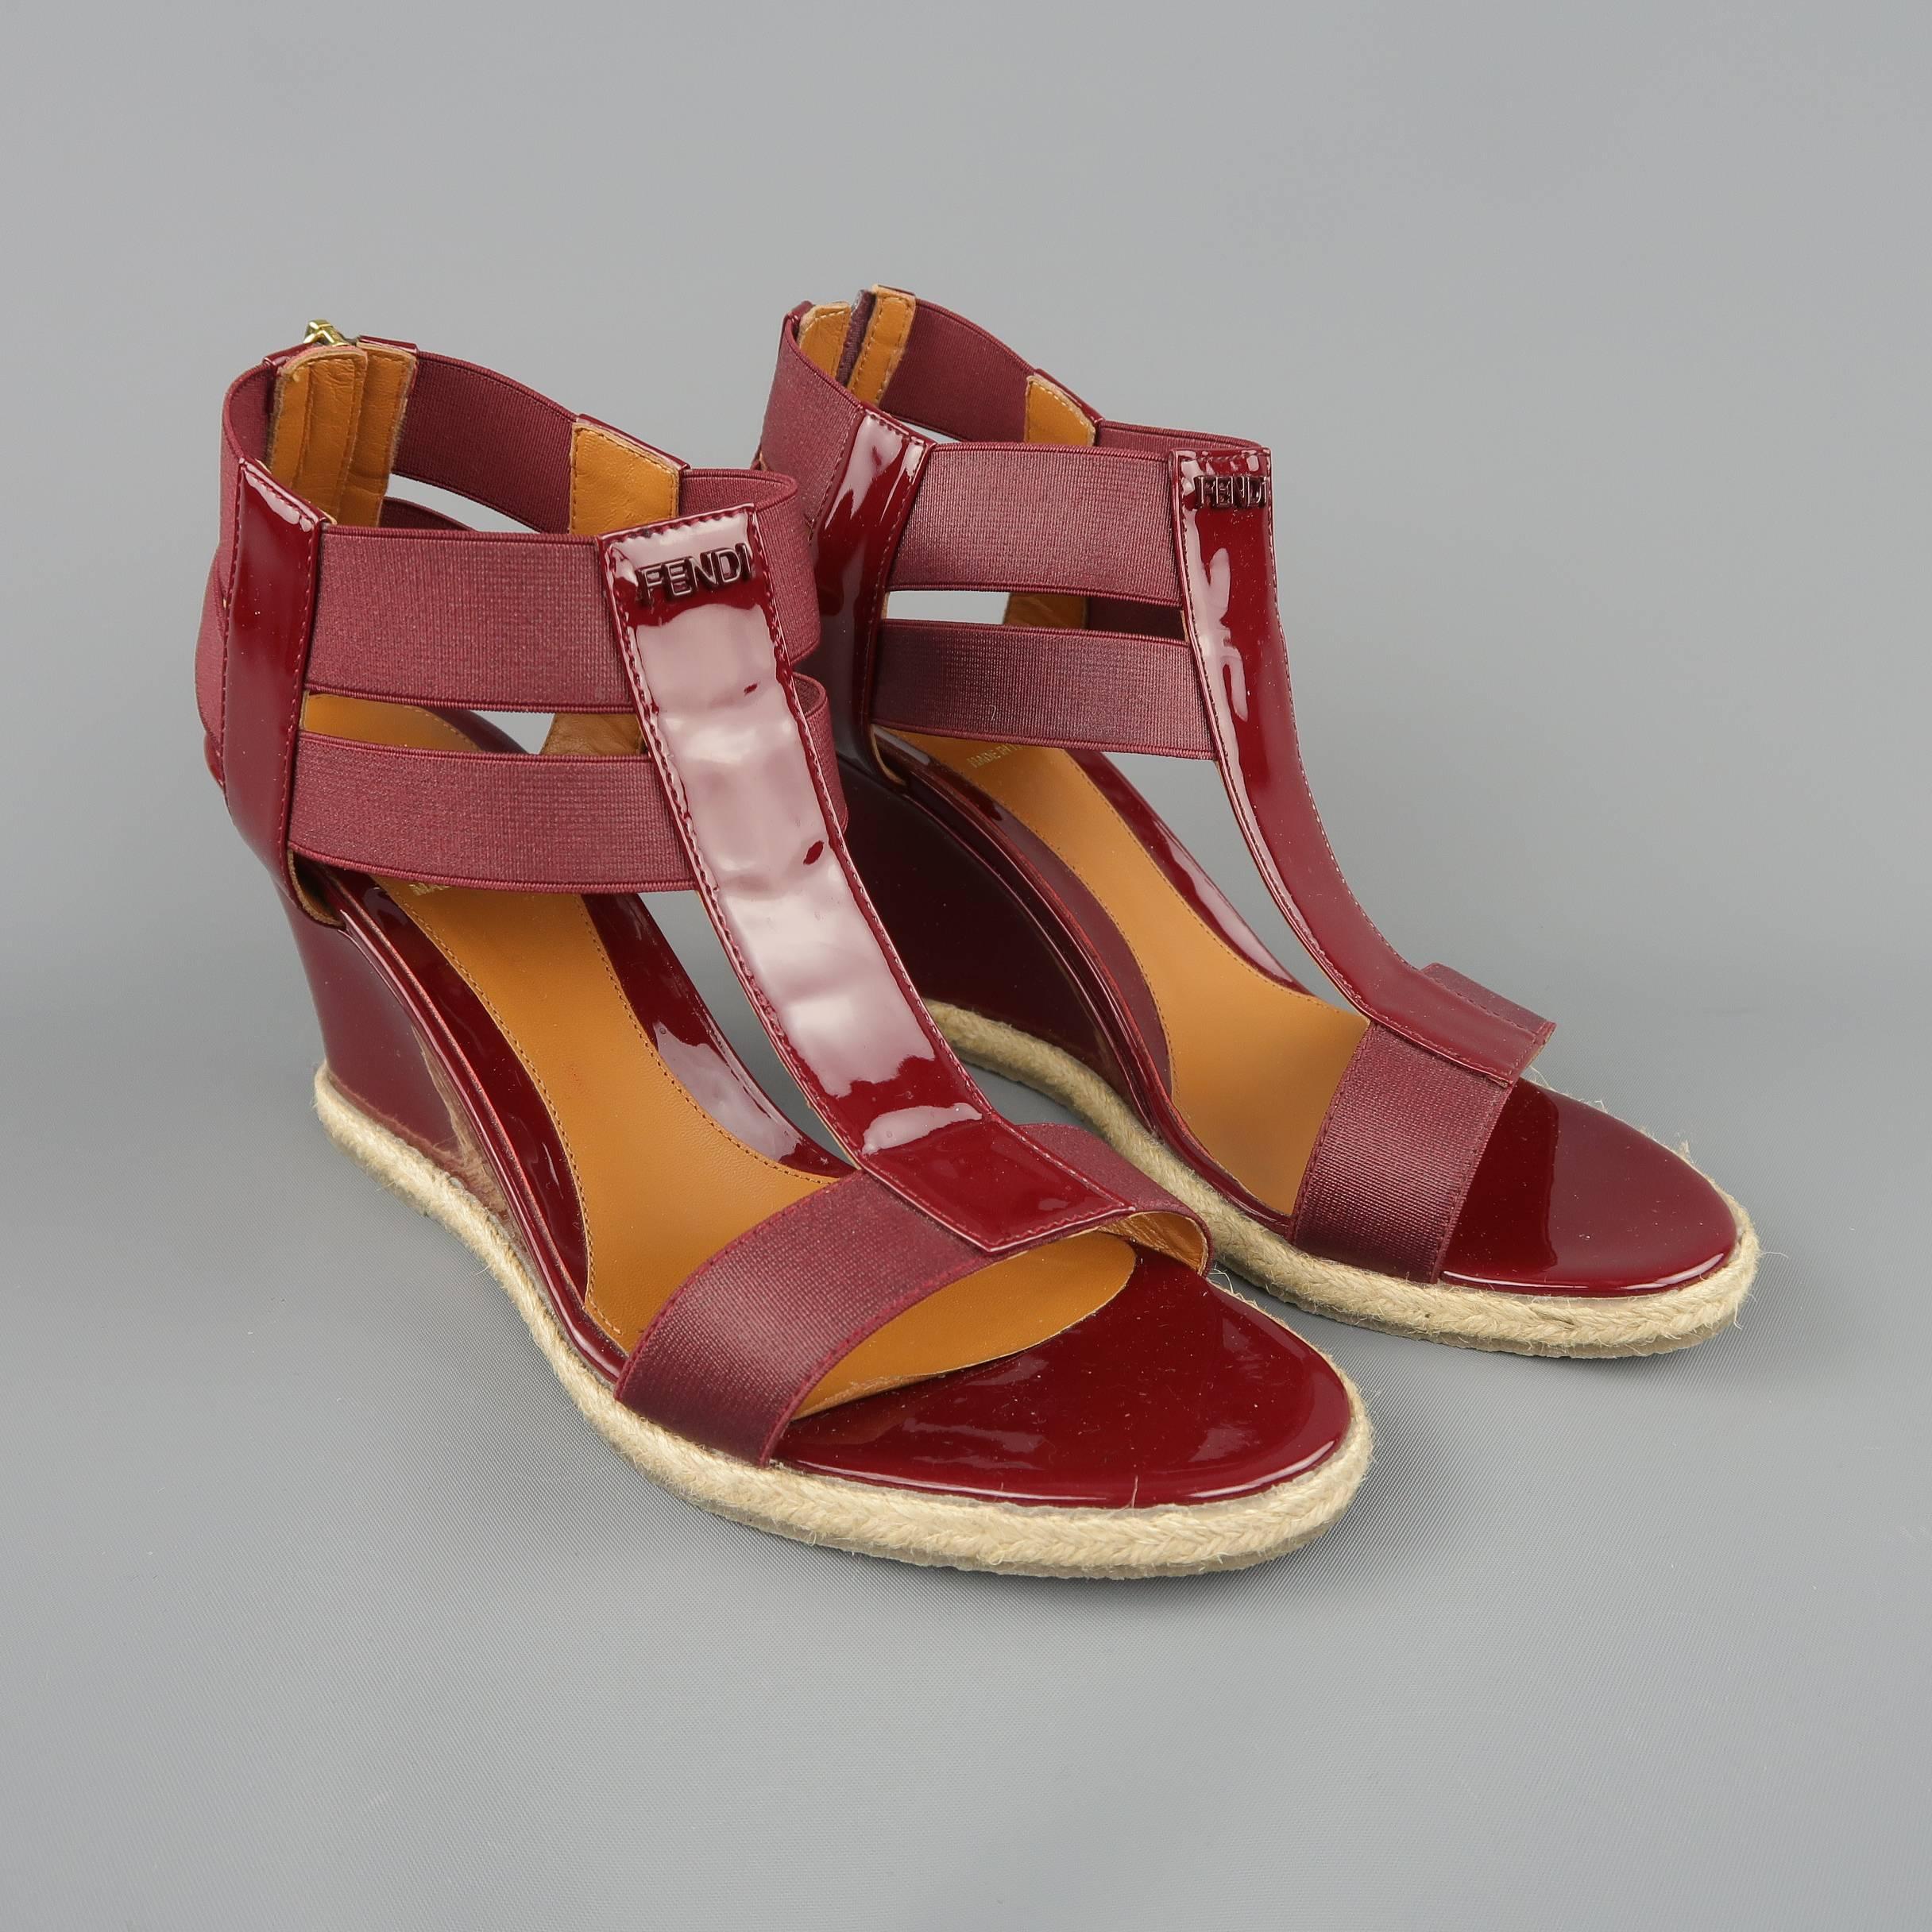 FENDI sandals come in burgundy patent leather and feature a T strap front with elastic sides, back zip, and covered wedge heel with espadrille woven trim. With box.  Made in Italy.
 
Good Pre-Owned Condition.
Marked: IT 38.5
 
Measurements:
 
Heel: